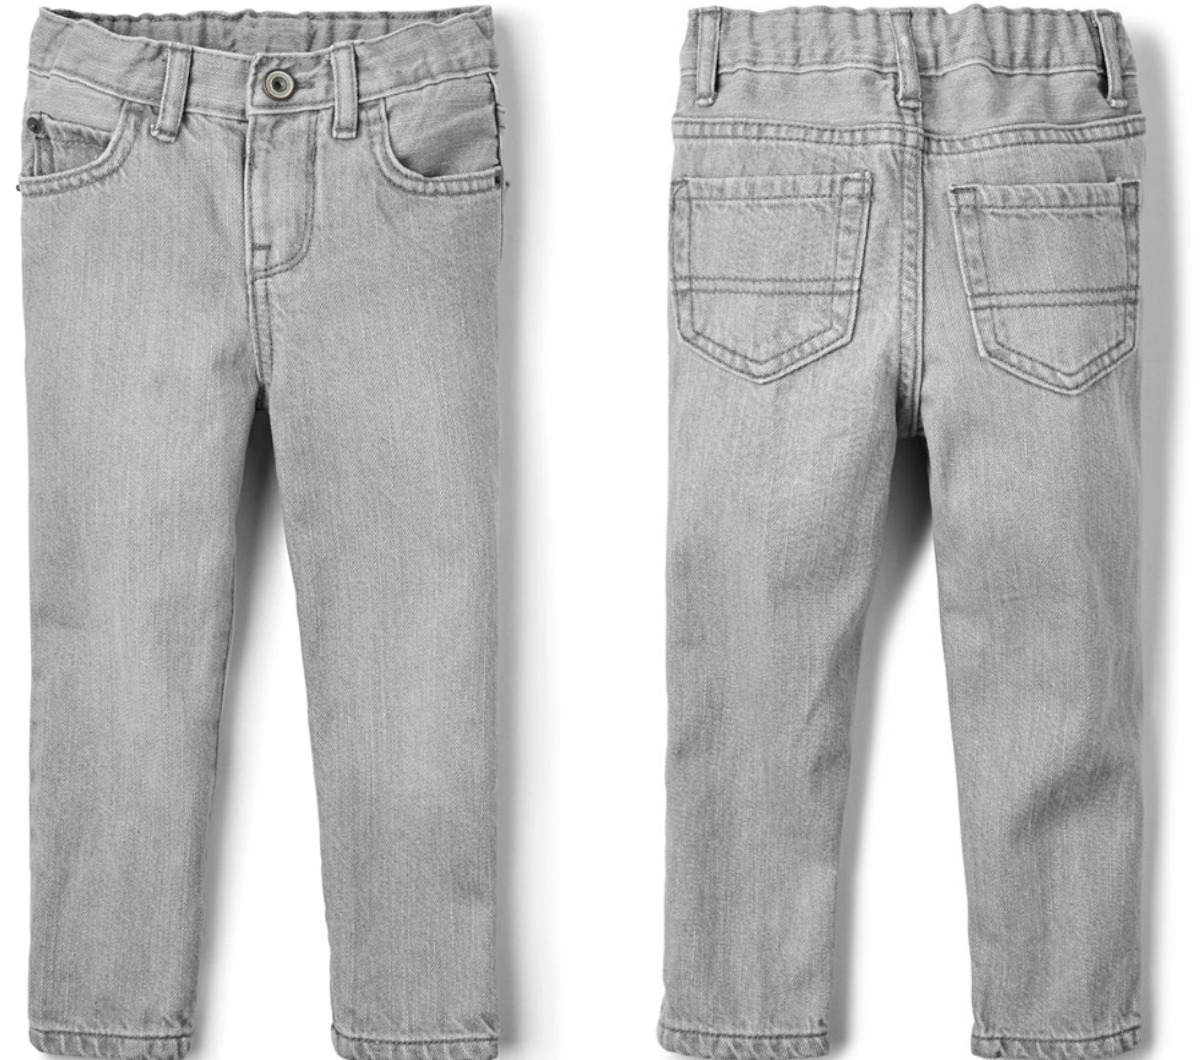 Front and back view of a gray pair boys jeans